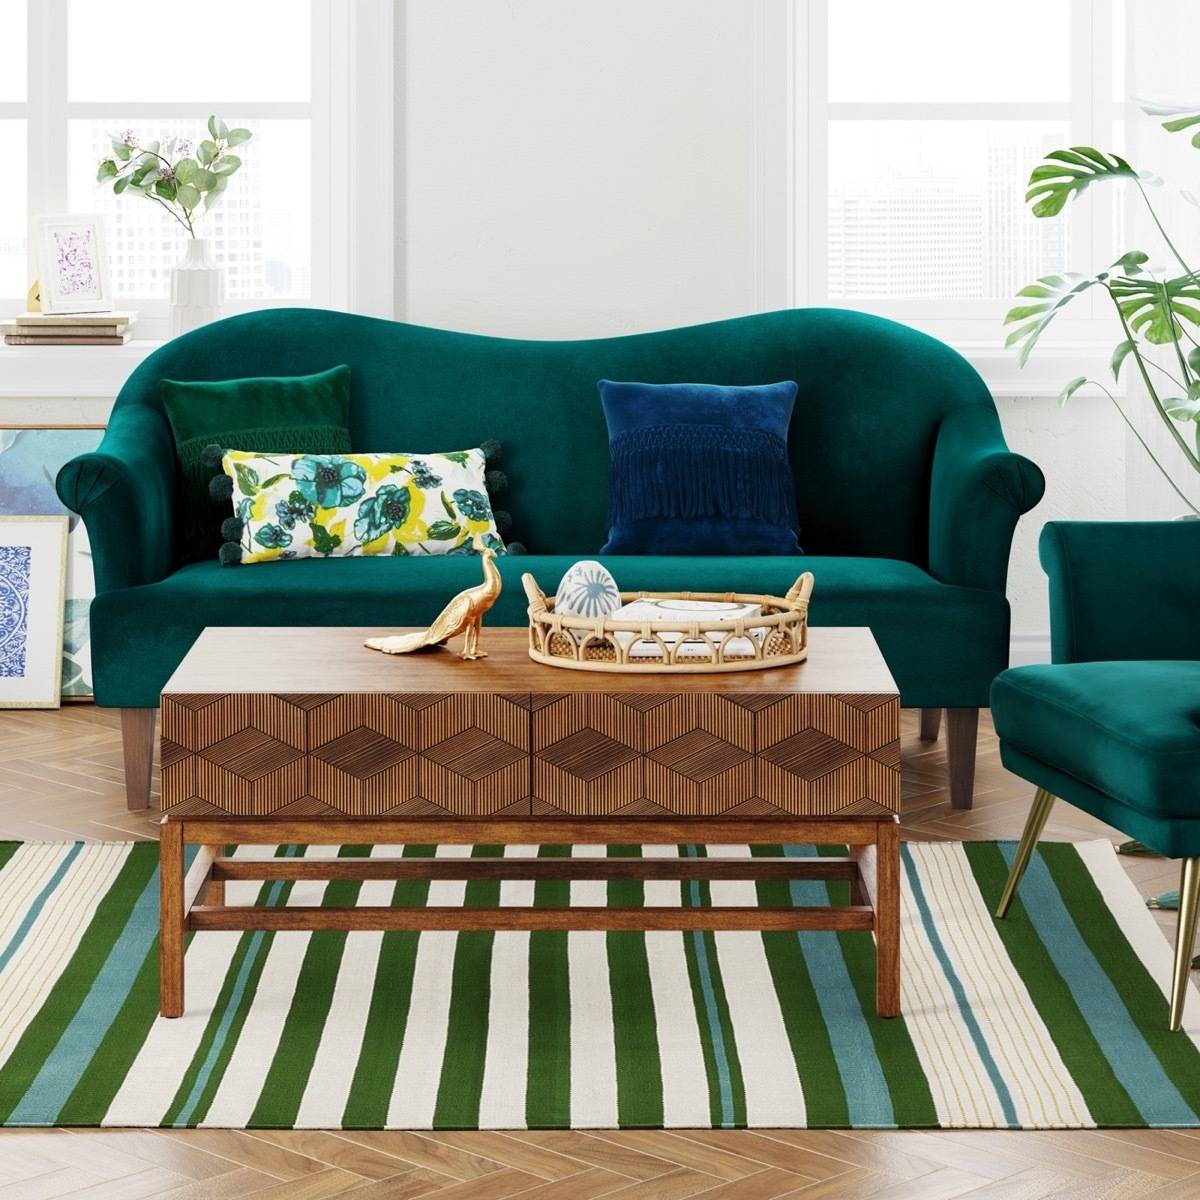 Teal green striped rug from Target